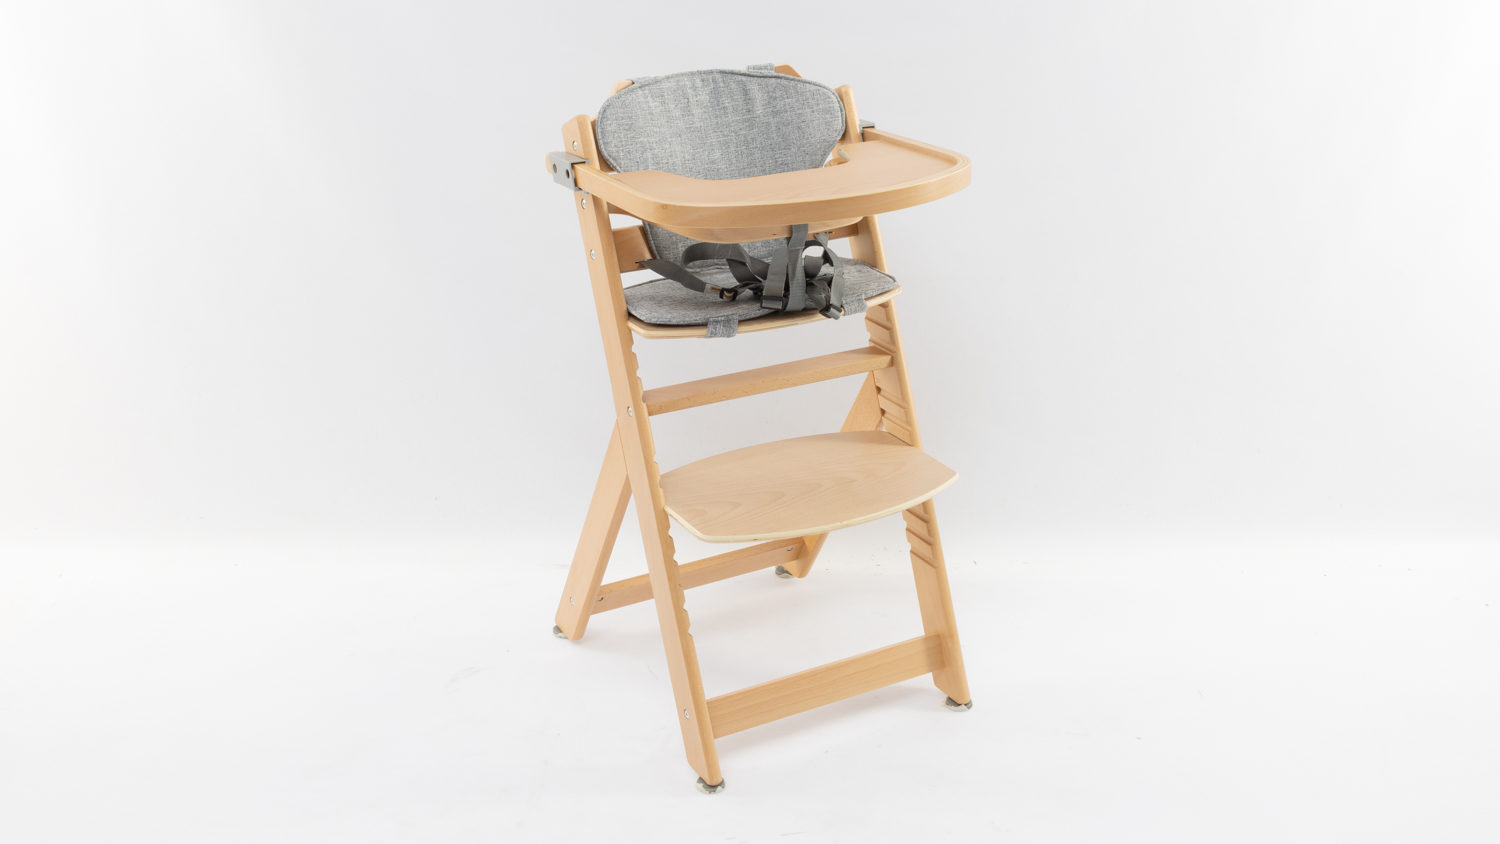 Kmart Anko 2-in-1 Wooden Highchair carousel image